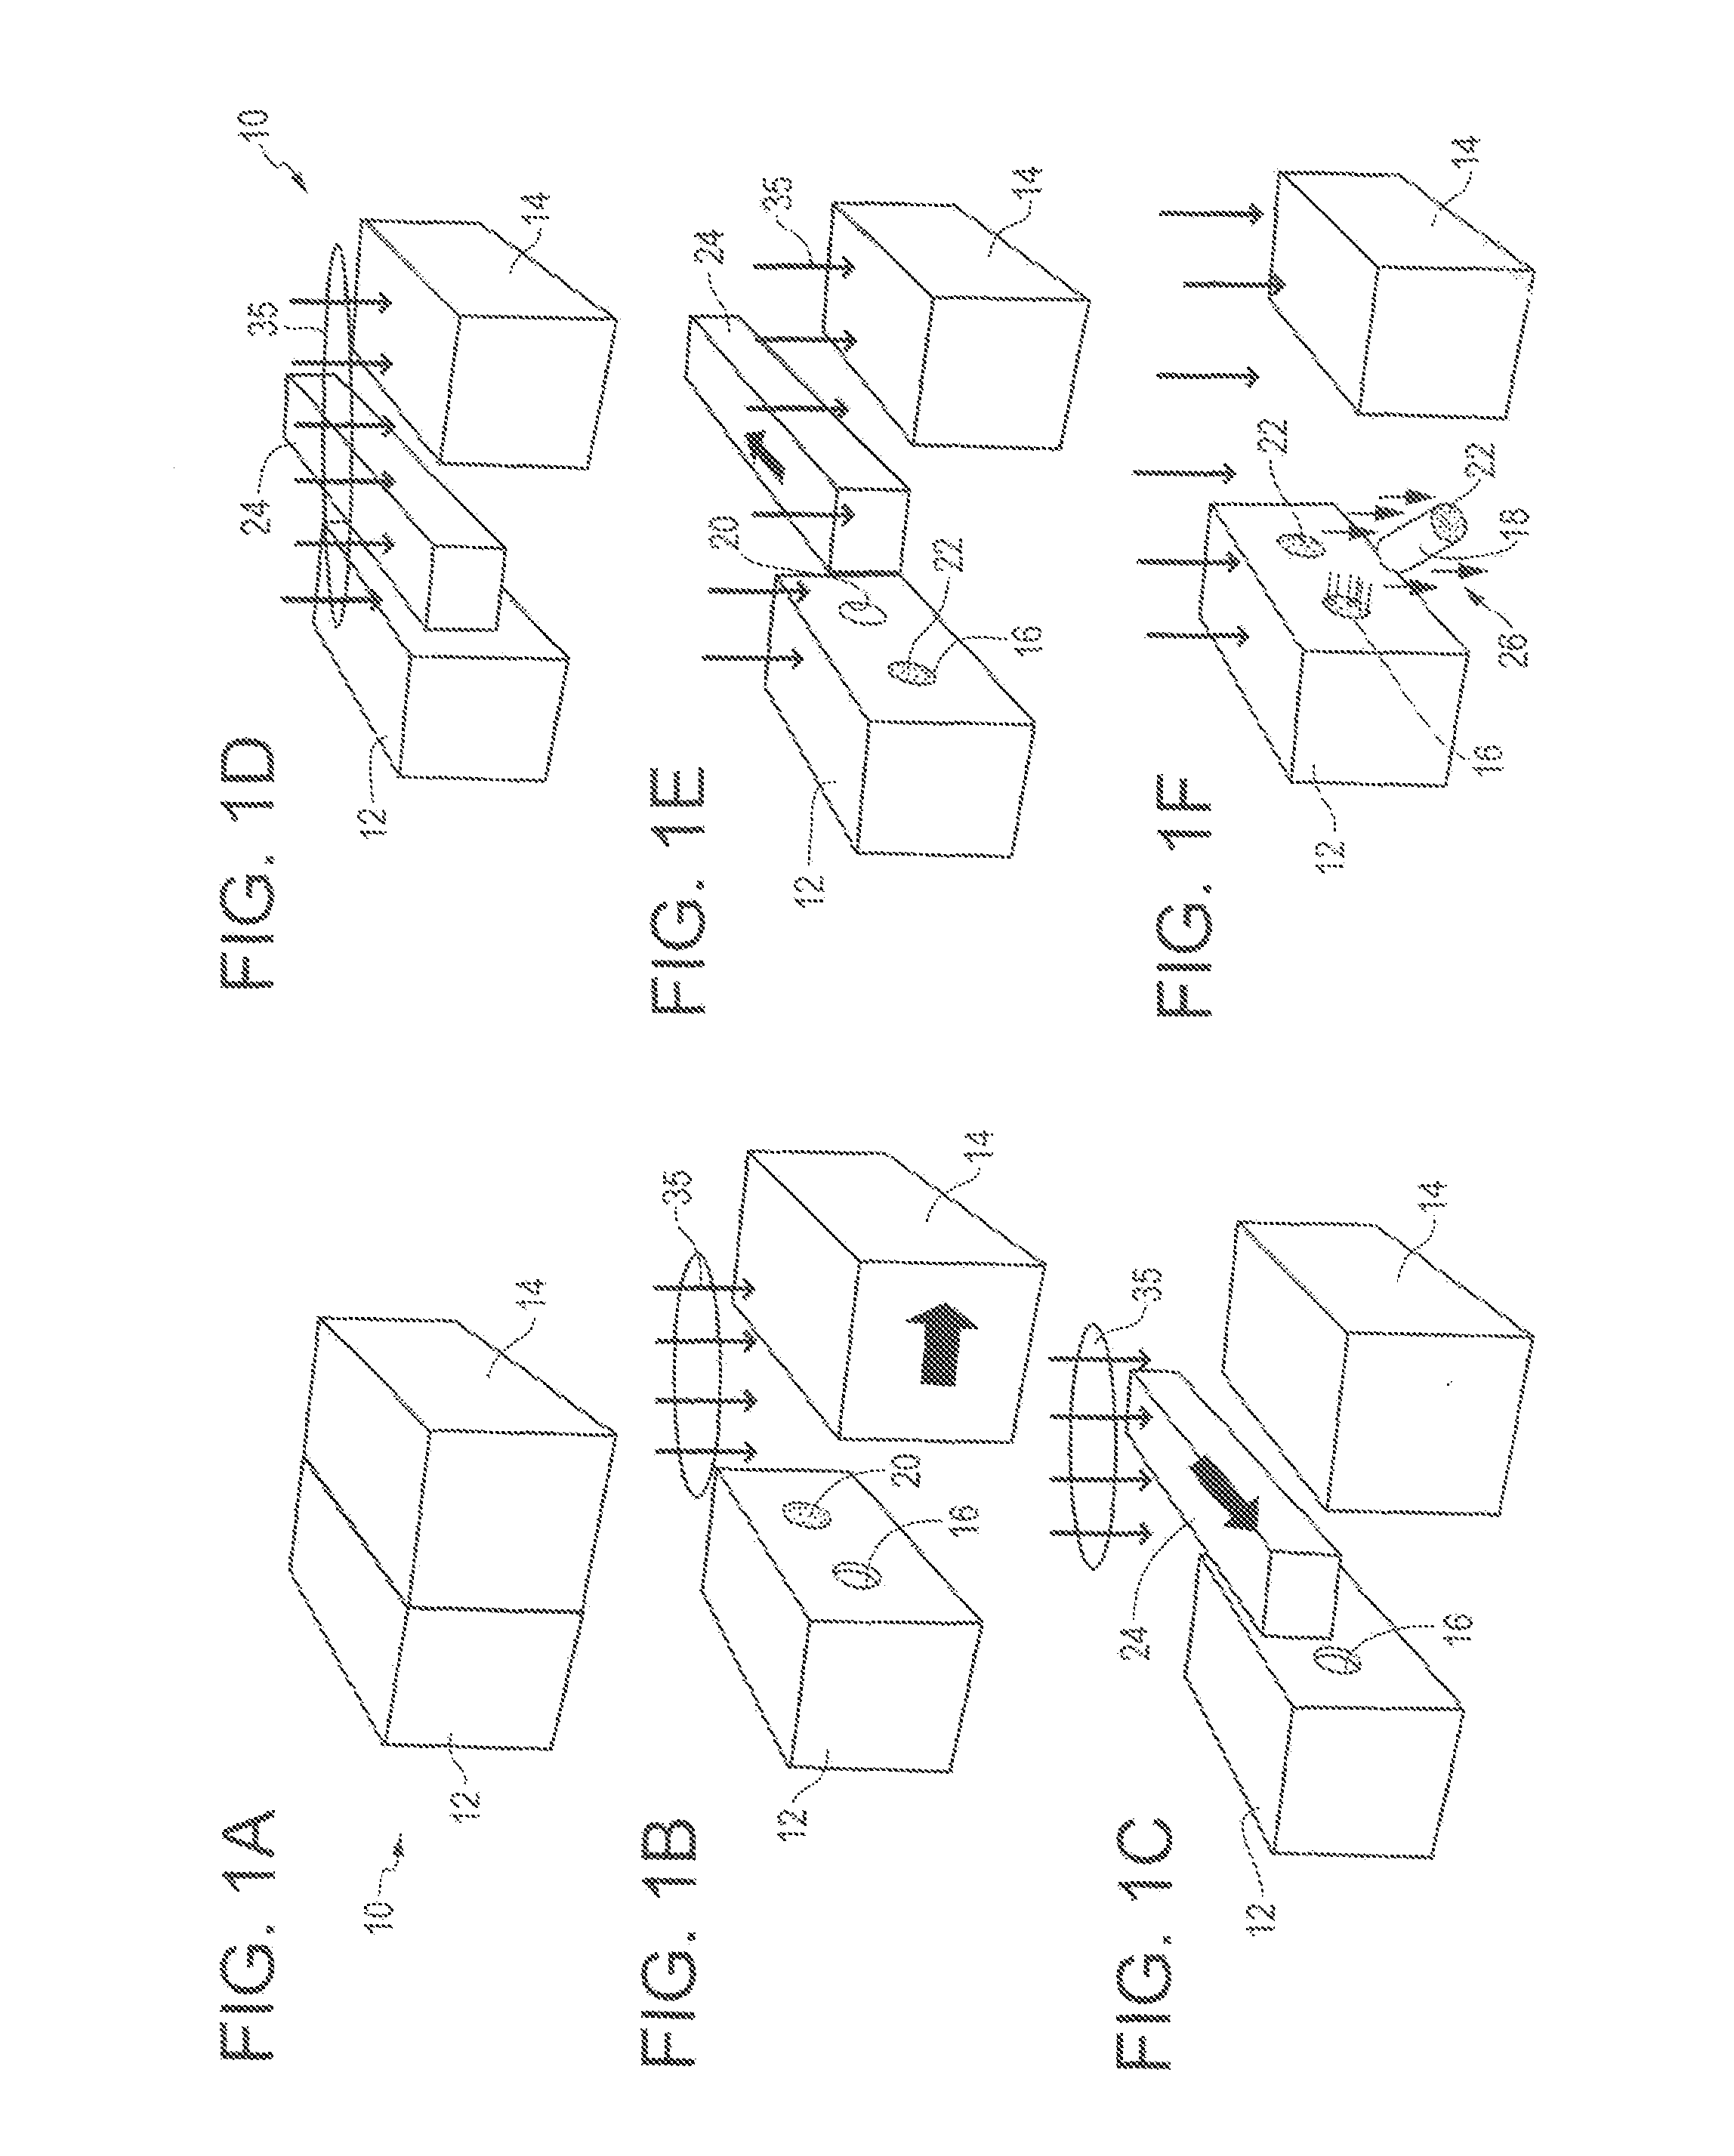 Method for molding and assembling containers with stoppers and filling same